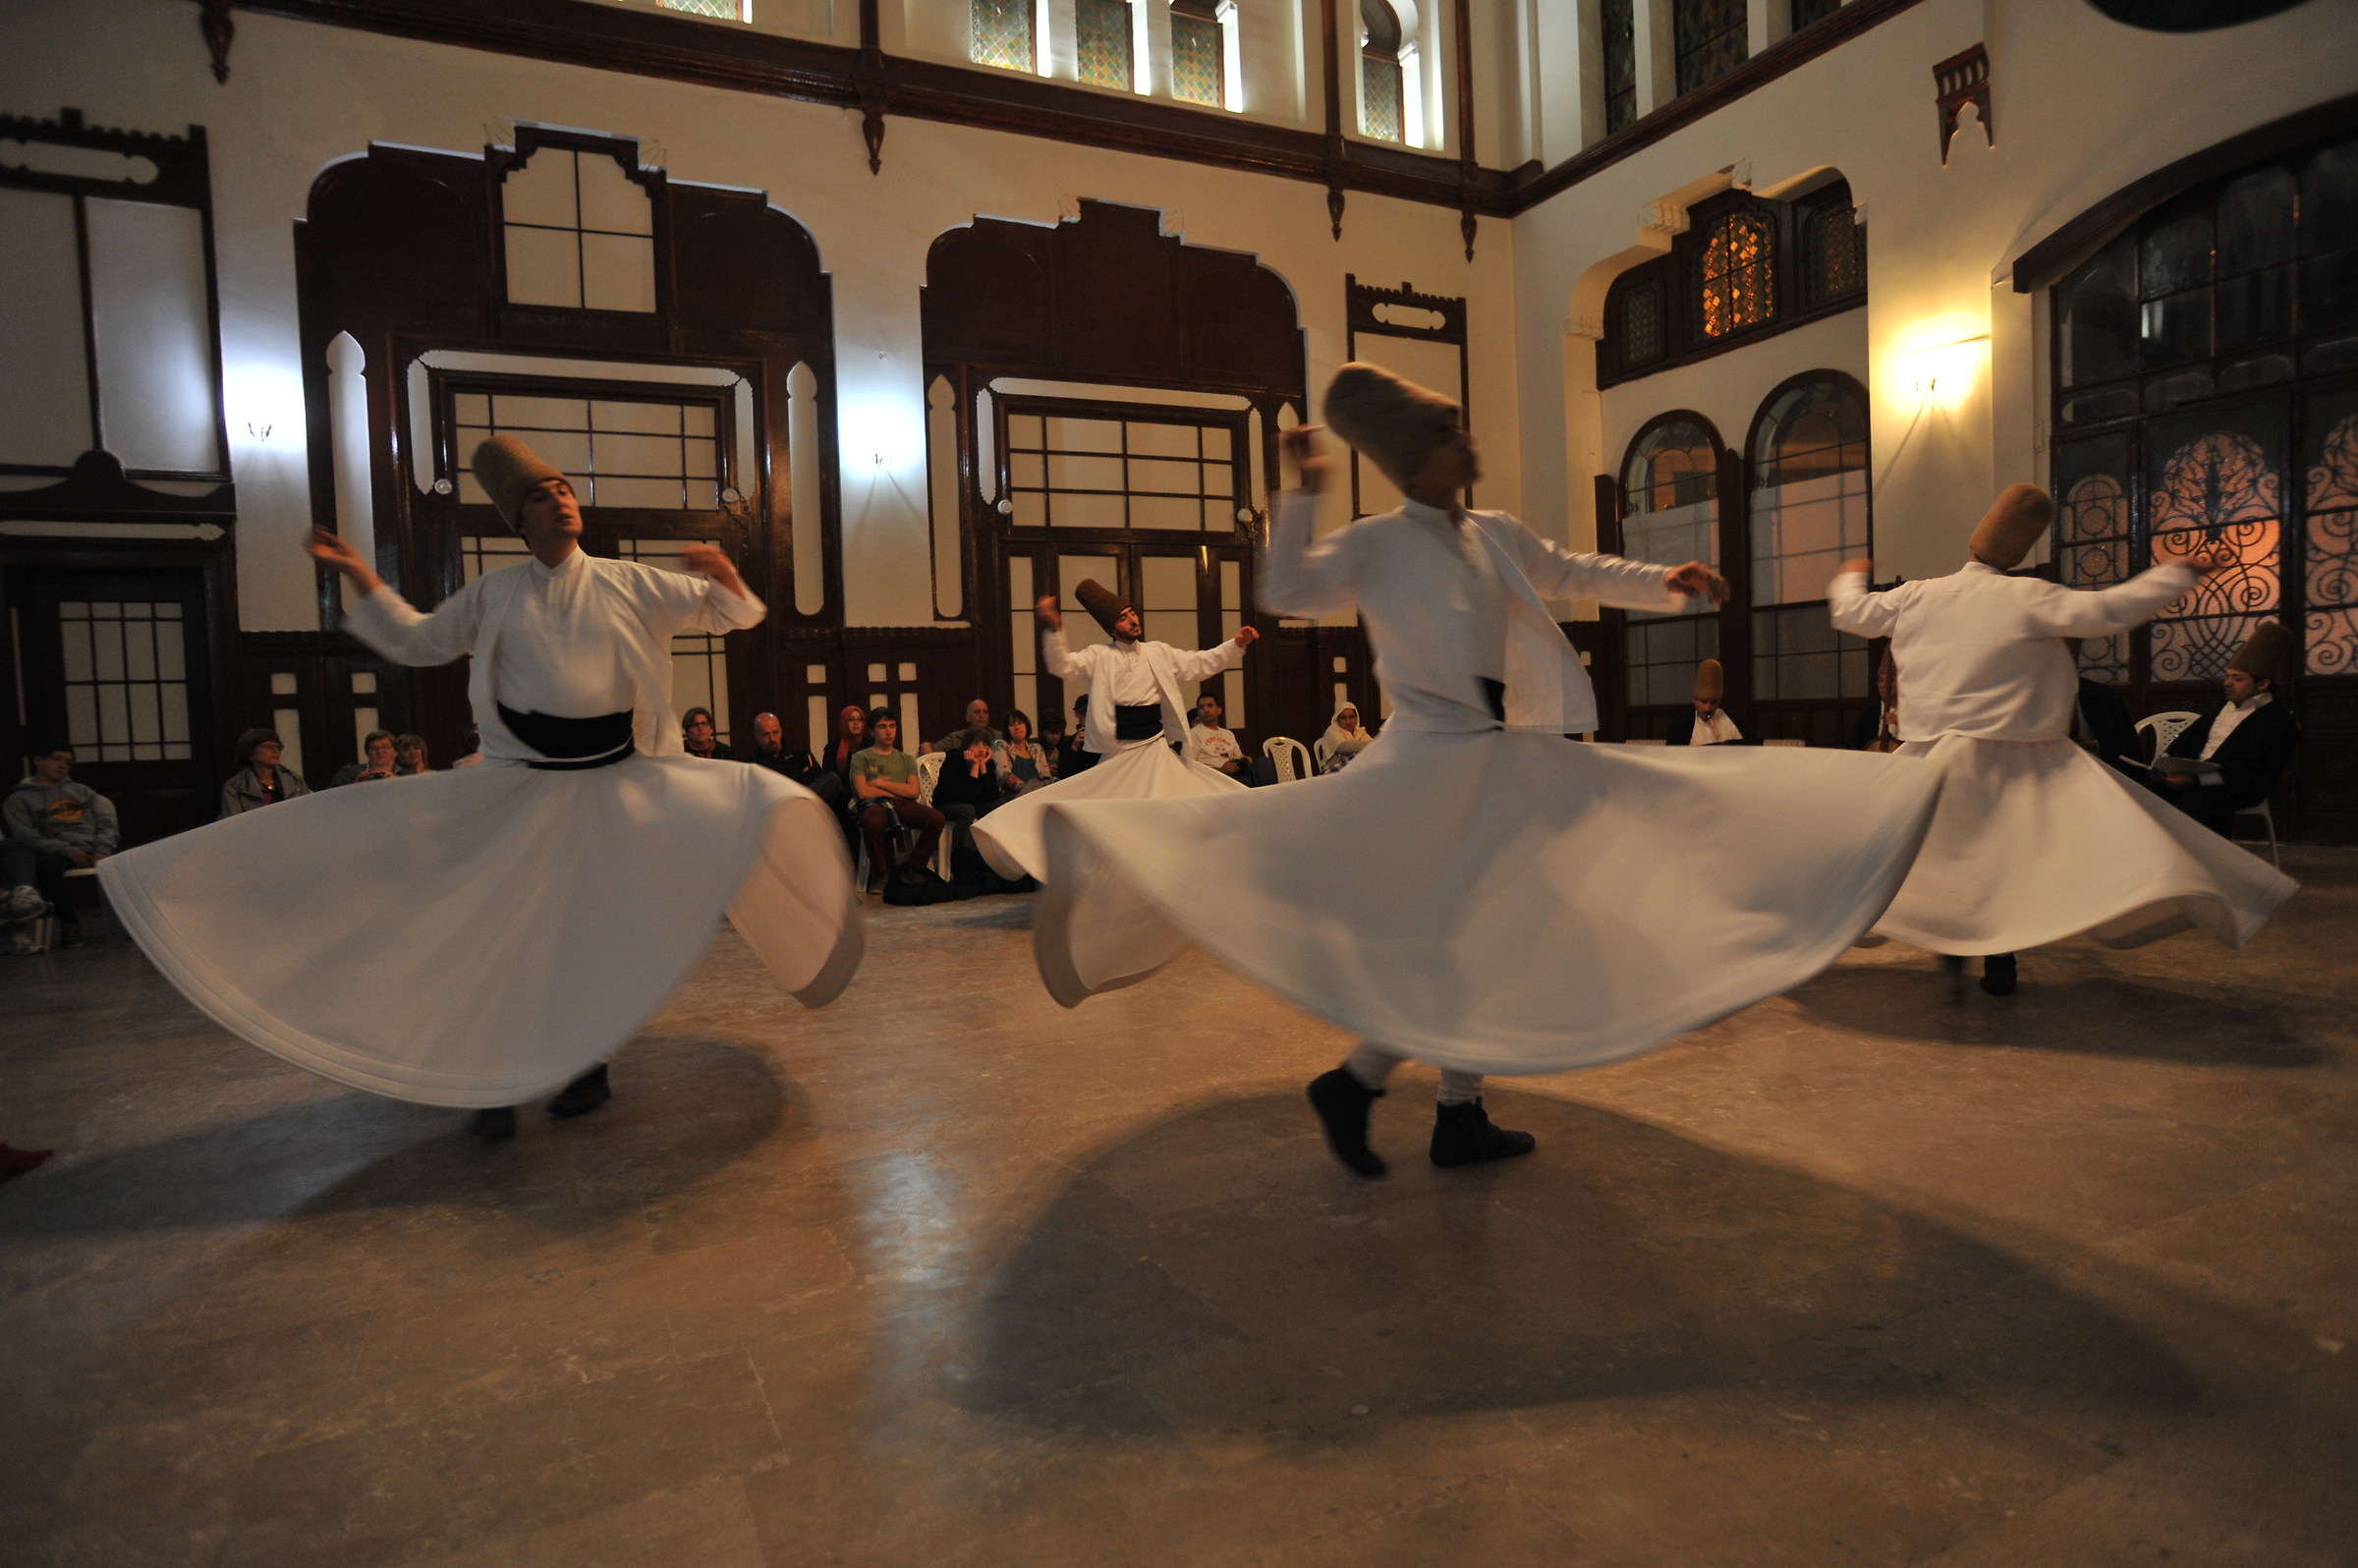 Istanbul: the ecstasy of the Dervishes...